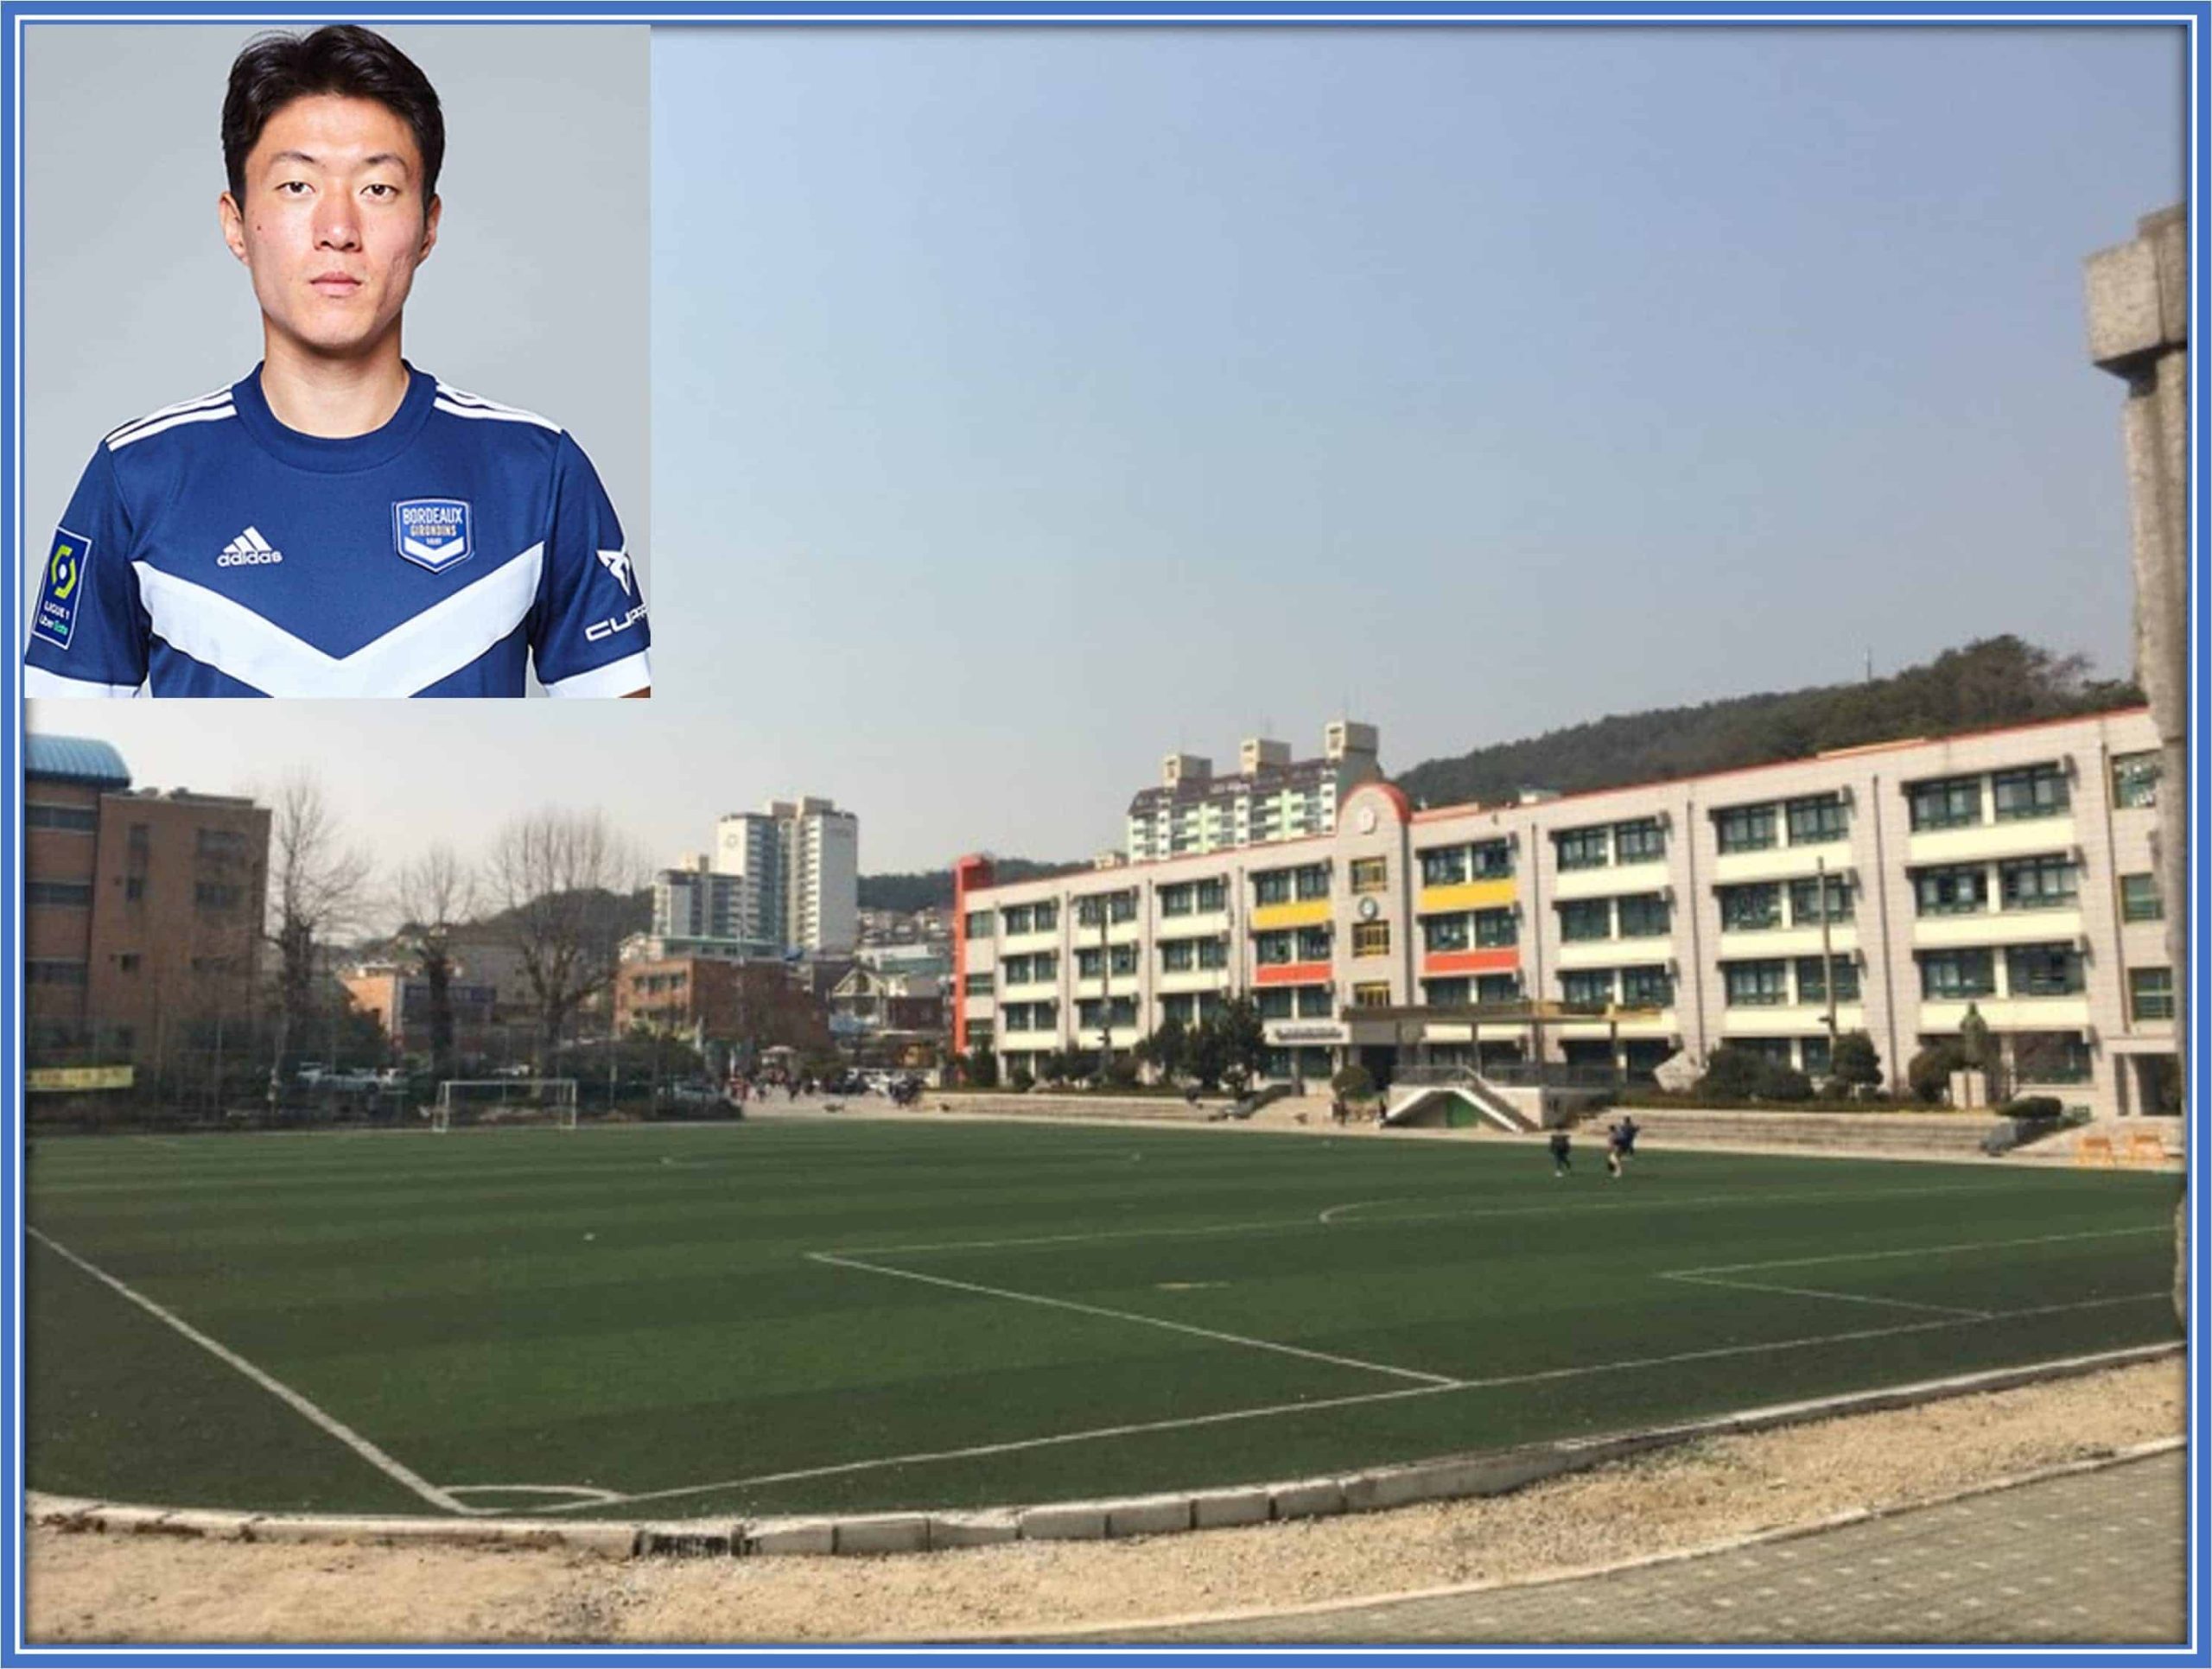 An overview of Yongin Elementary School, where Hwang had his earliest education.